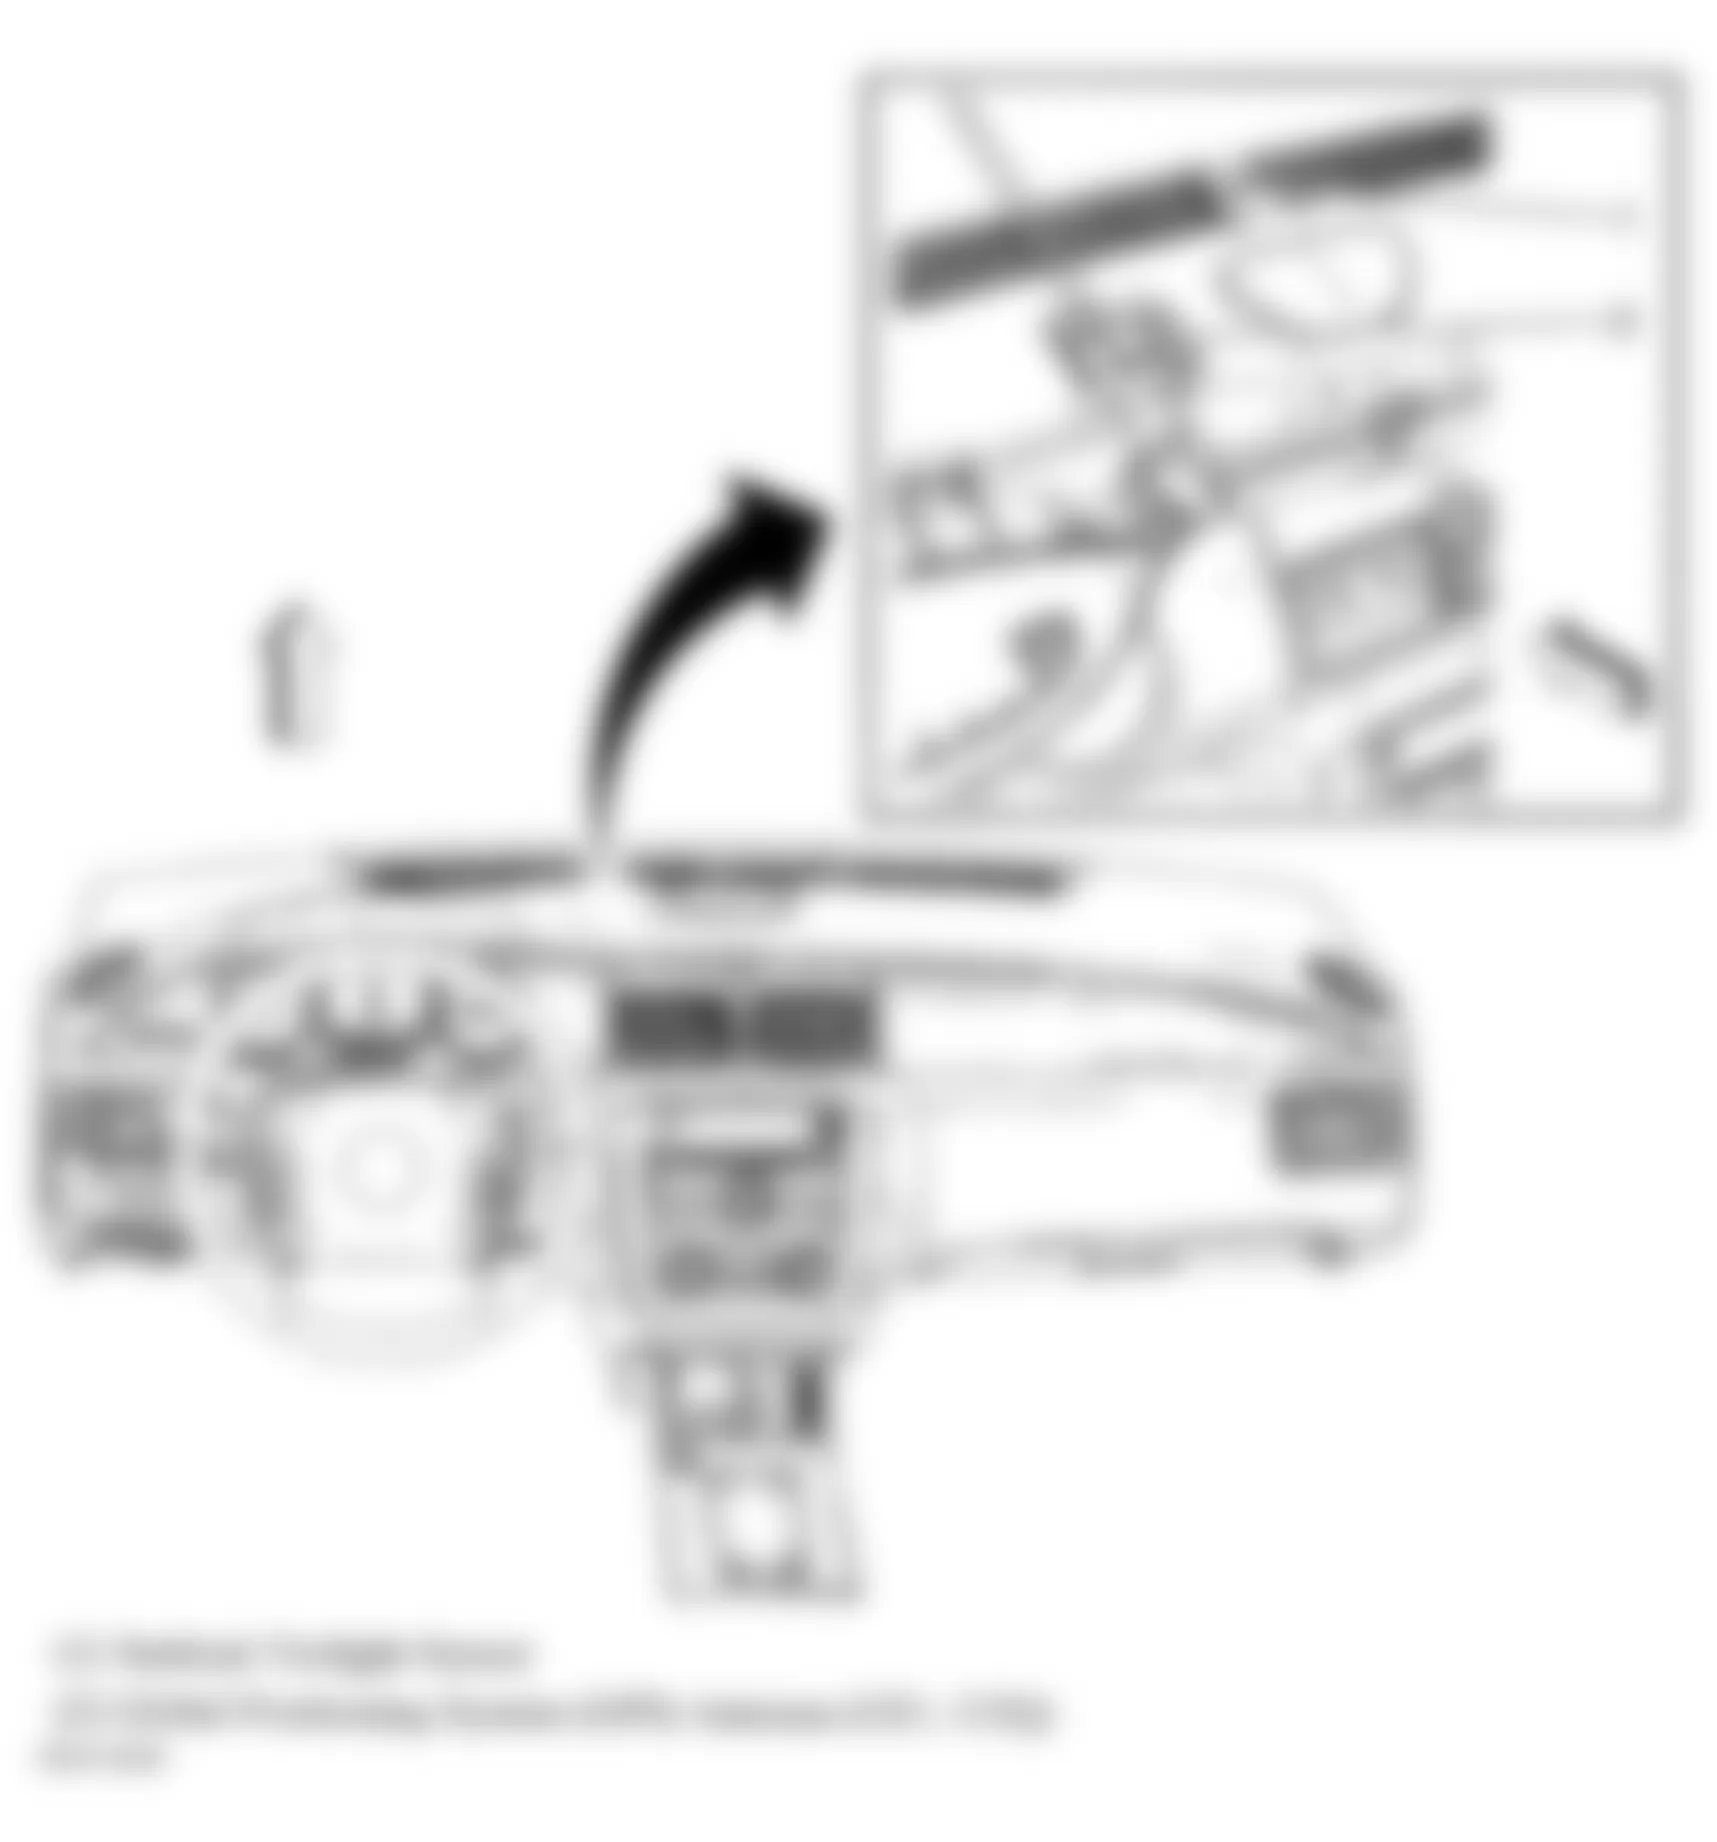 Buick Lucerne CXL 2010 - Component Locations -  Top Center Of Dash